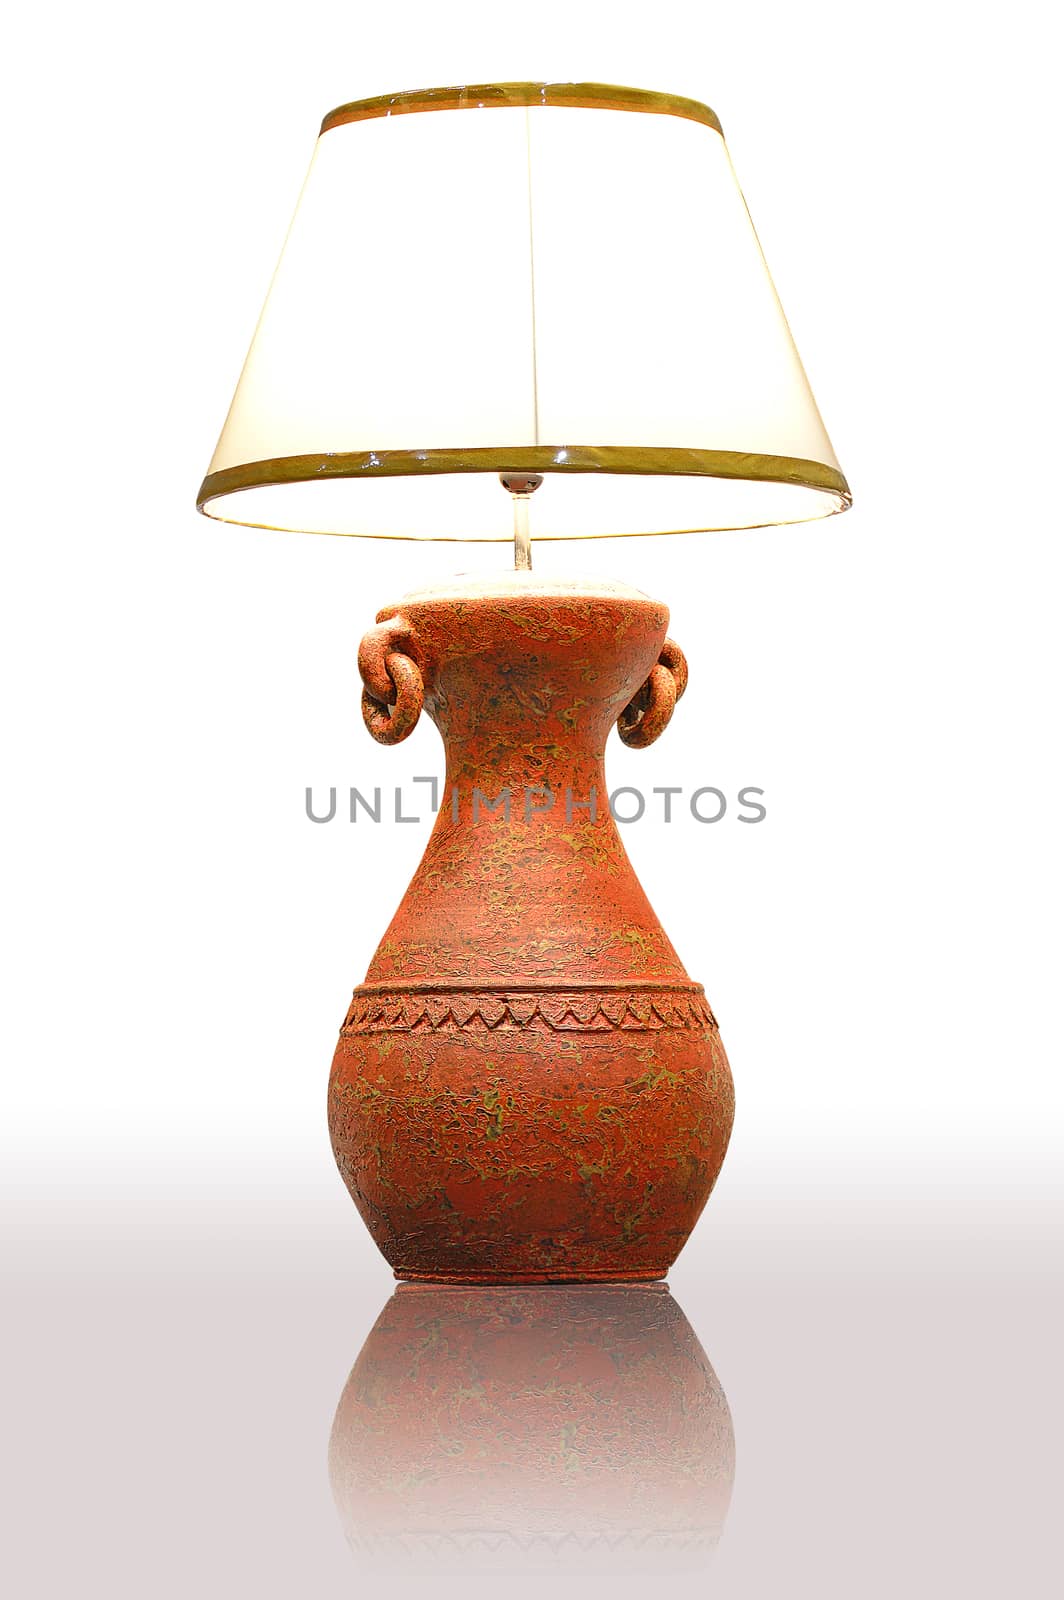 Vintage table lamp by Lekchangply